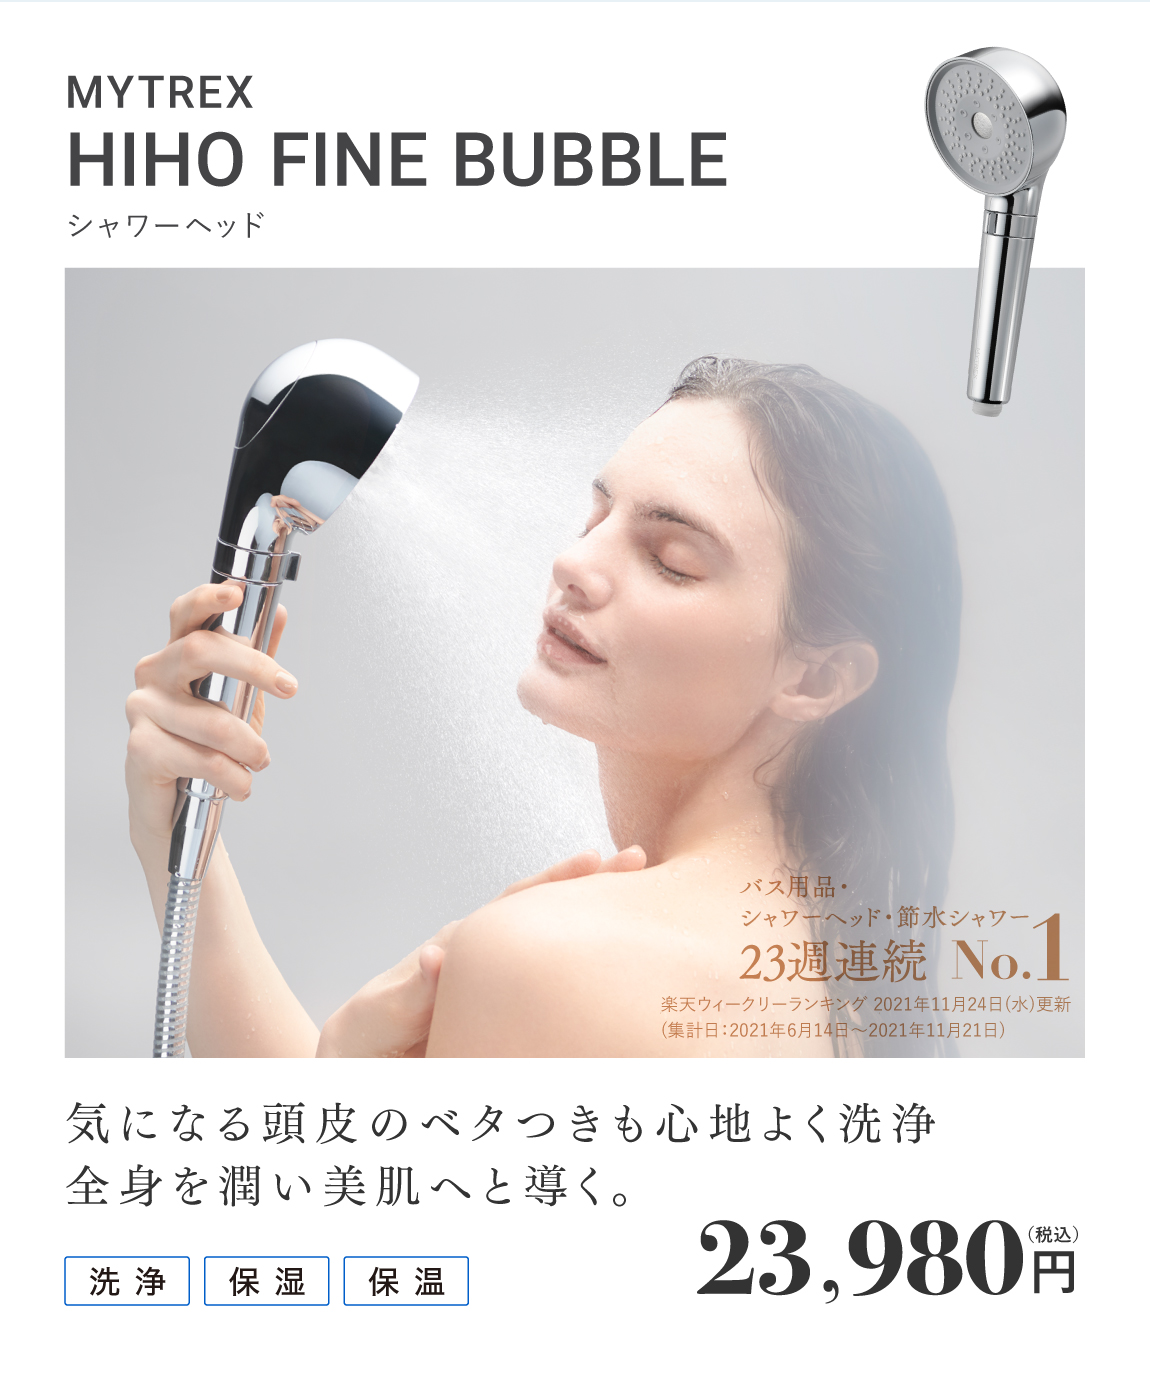 MYTREX HIHO FINE BUBBLE